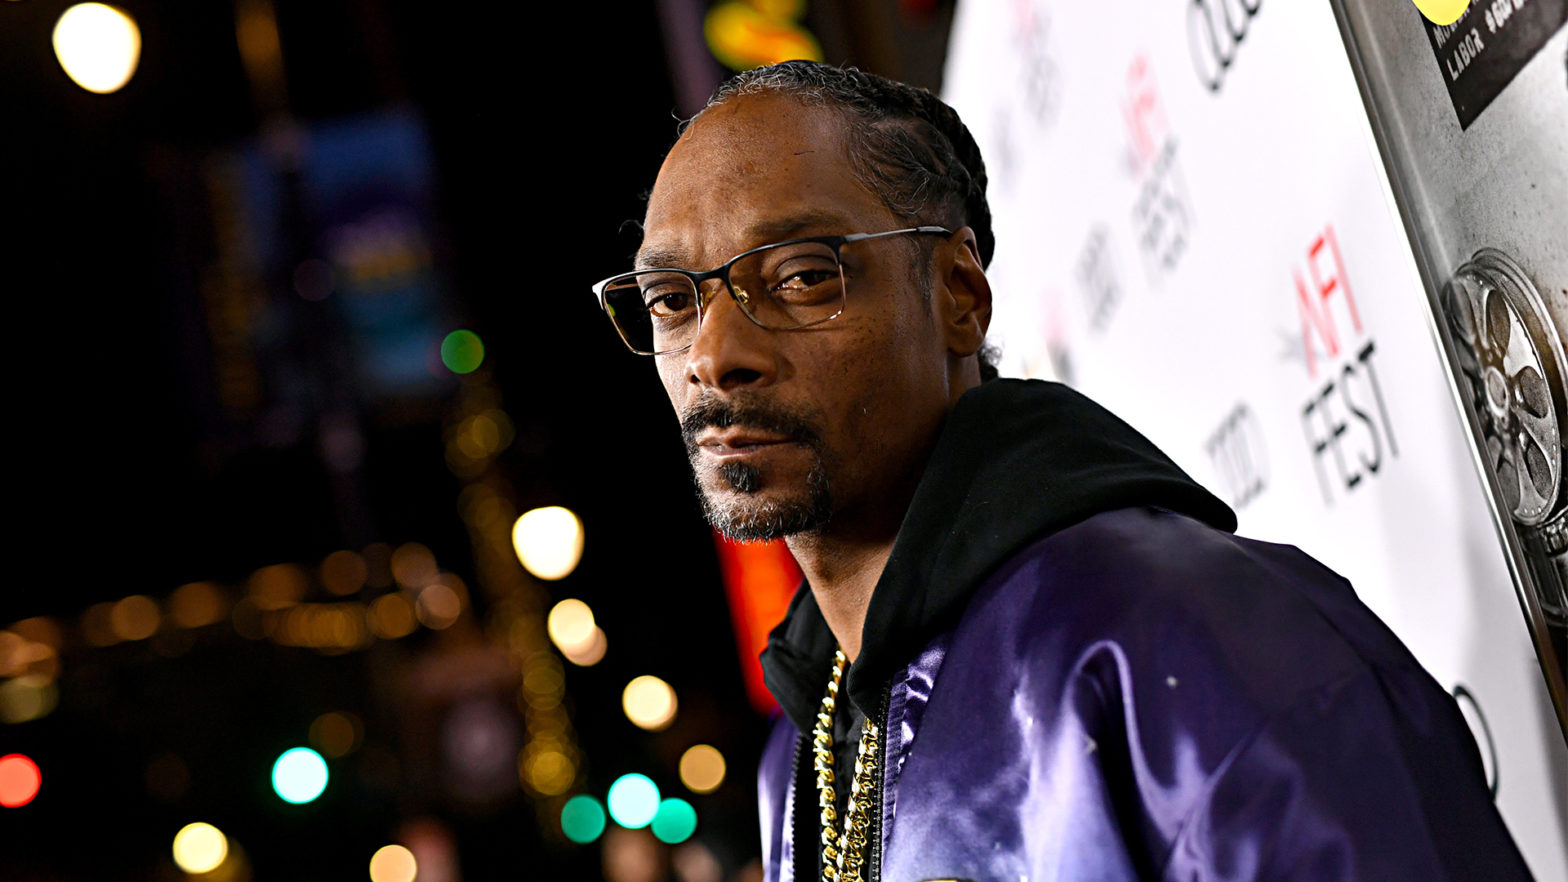 Snoop Dogg Says He Helped A Company Reach A $100M Valuation, But 'Didn't Have The Game To Get A Piece Of The Pie'